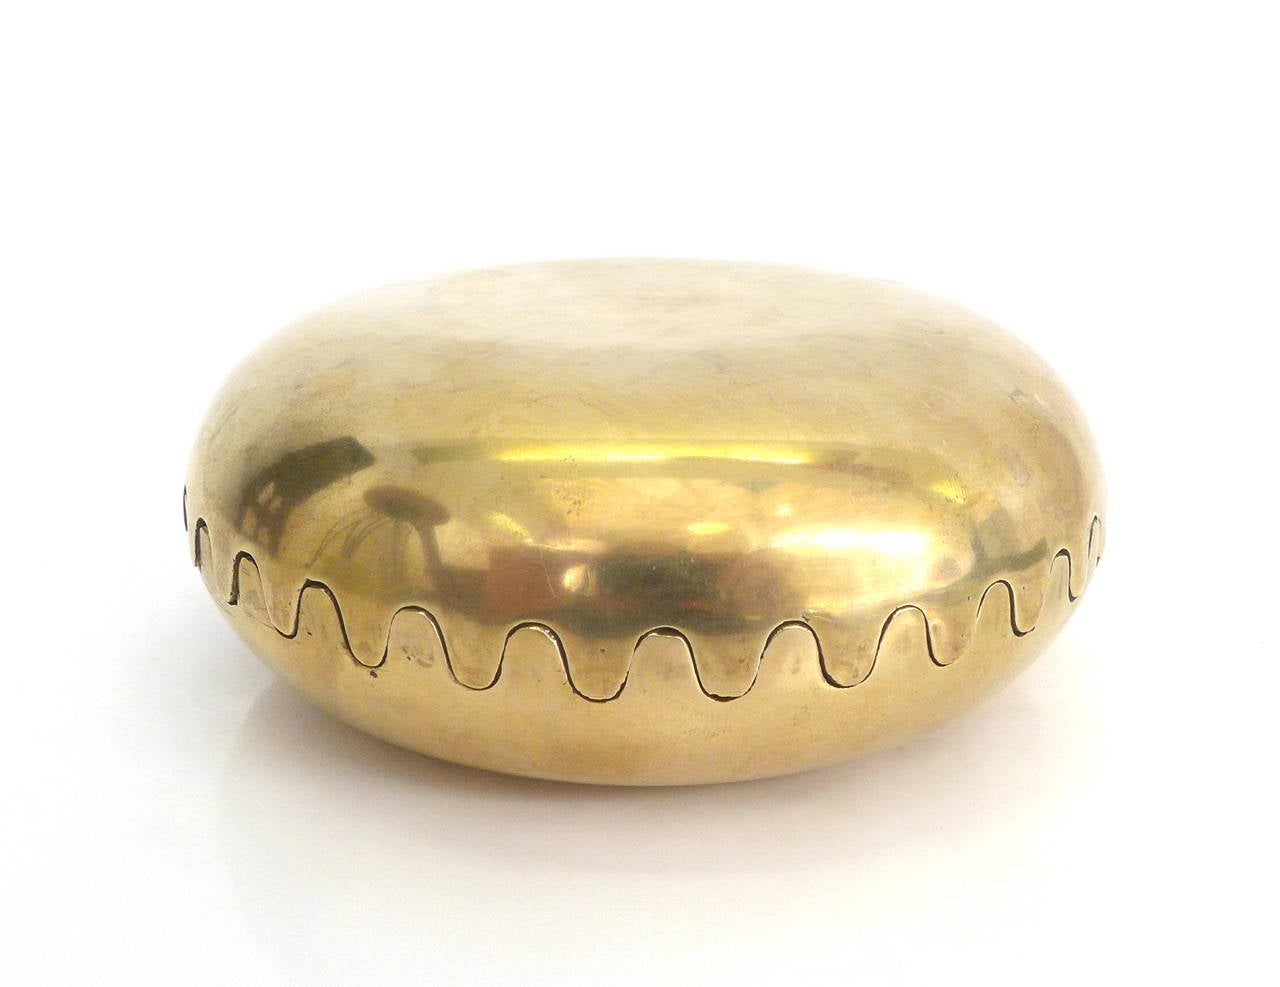 A lovely box of two identical cast brass halves with sinusoid lips joining to form a squished-sphere.  An elegant and unexpectedly creaturely decorative object.